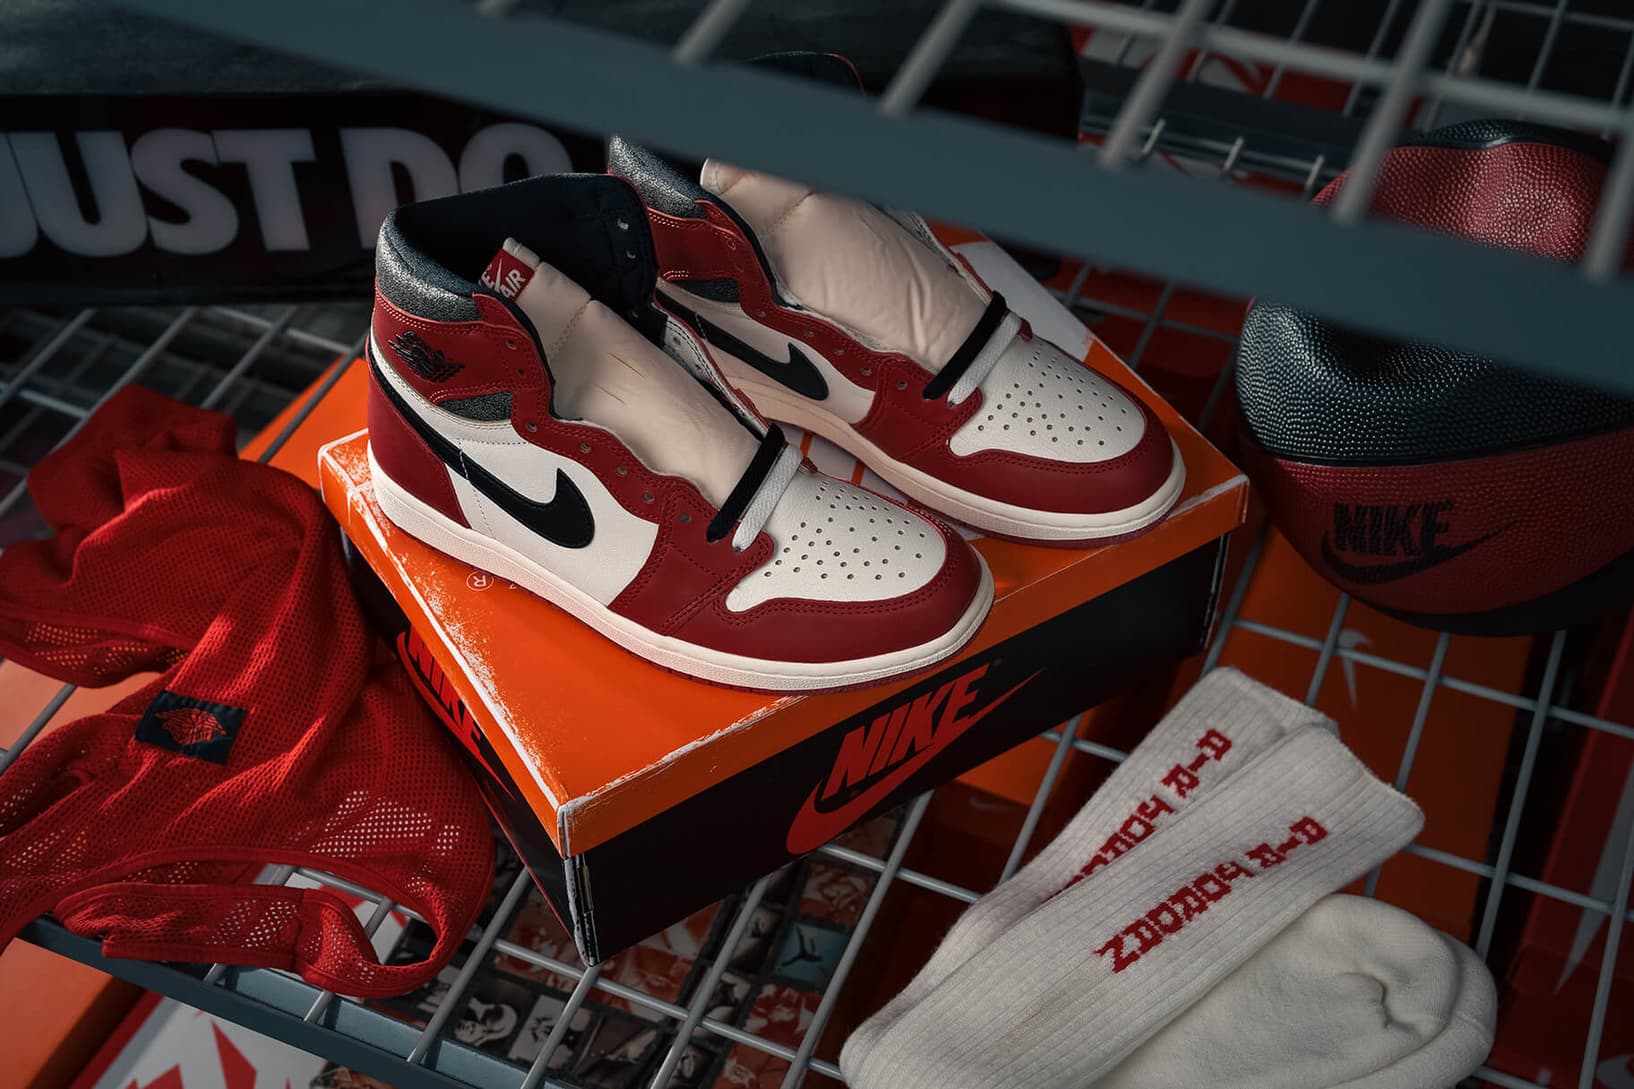 Air Jordan 2022 "Lost and Found" Chicago: The Inspiration Behind the Nike.com